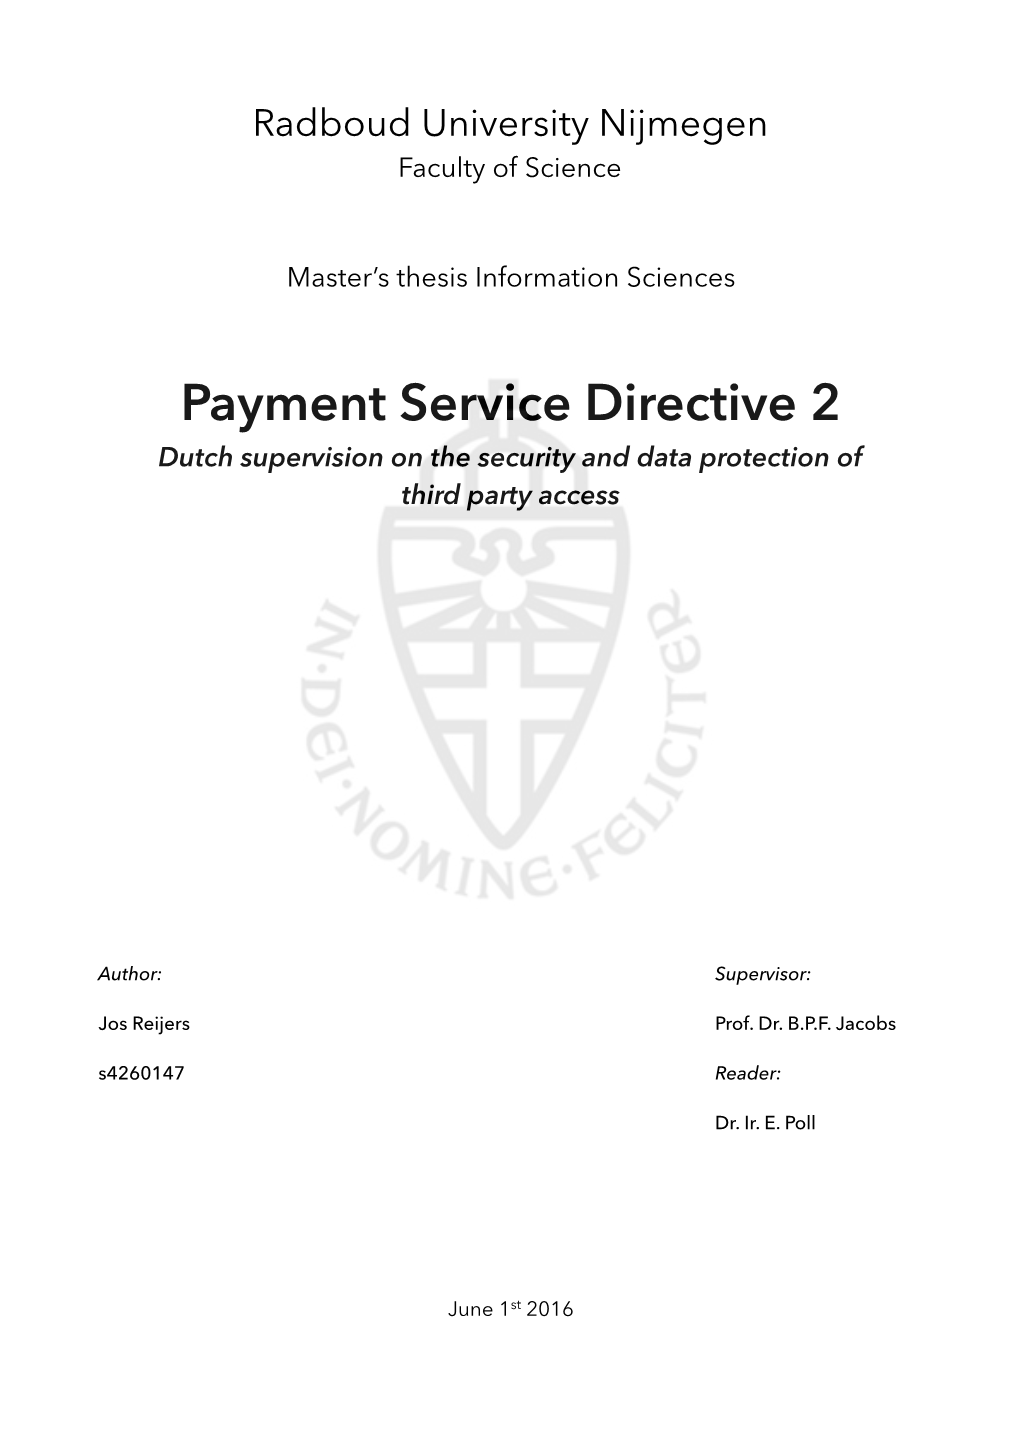 Payment Service Directive 2 Dutch Supervision on the Security and Data Protection of Third Party Access